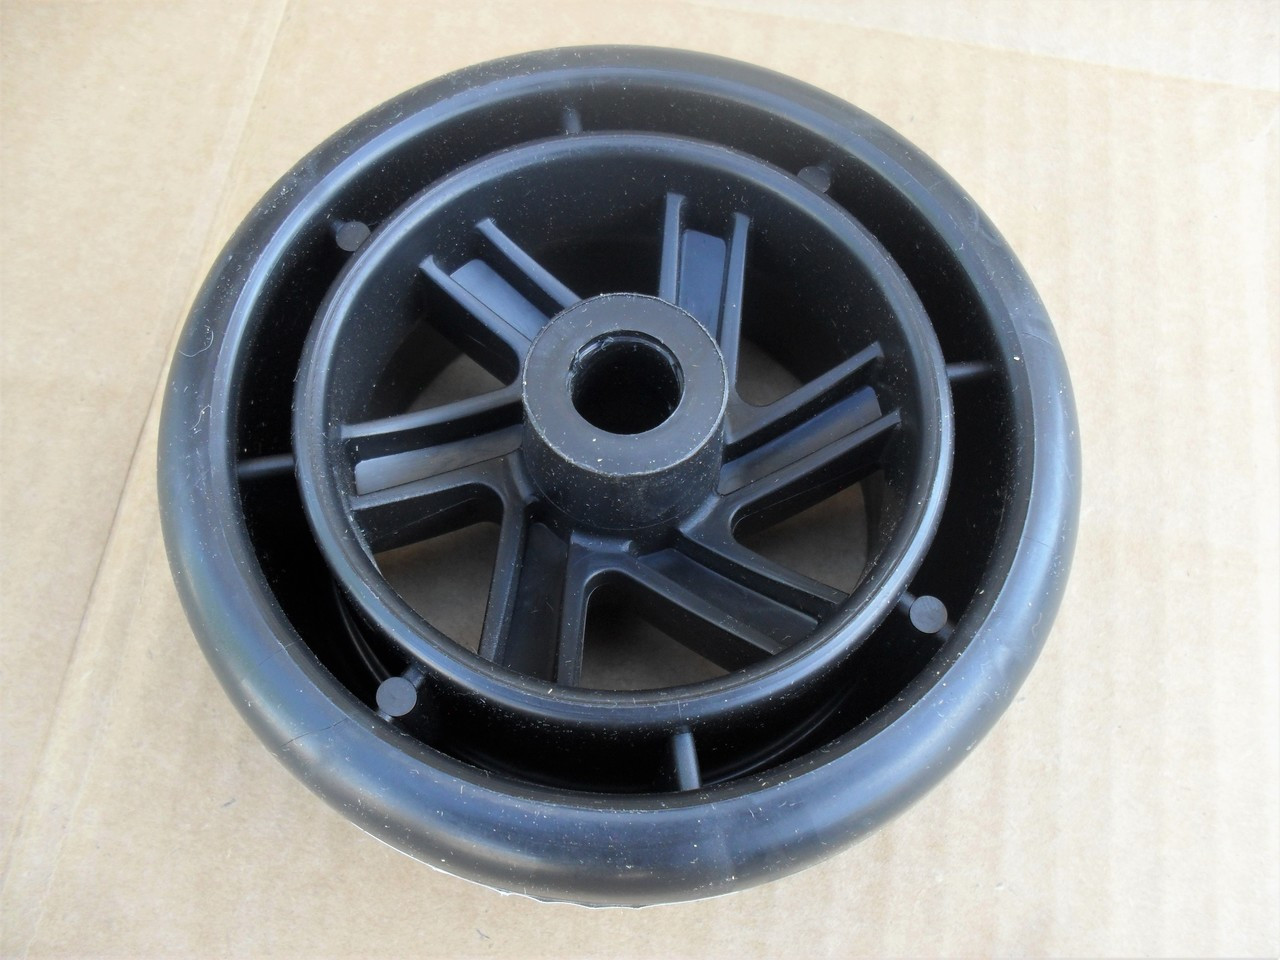 Deck Wheel for AYP Craftsman 14035, 188606, 532188606 Made In USA, Center Hole: 1/2" OD: 4-7/8", Hub: 1-1/2"